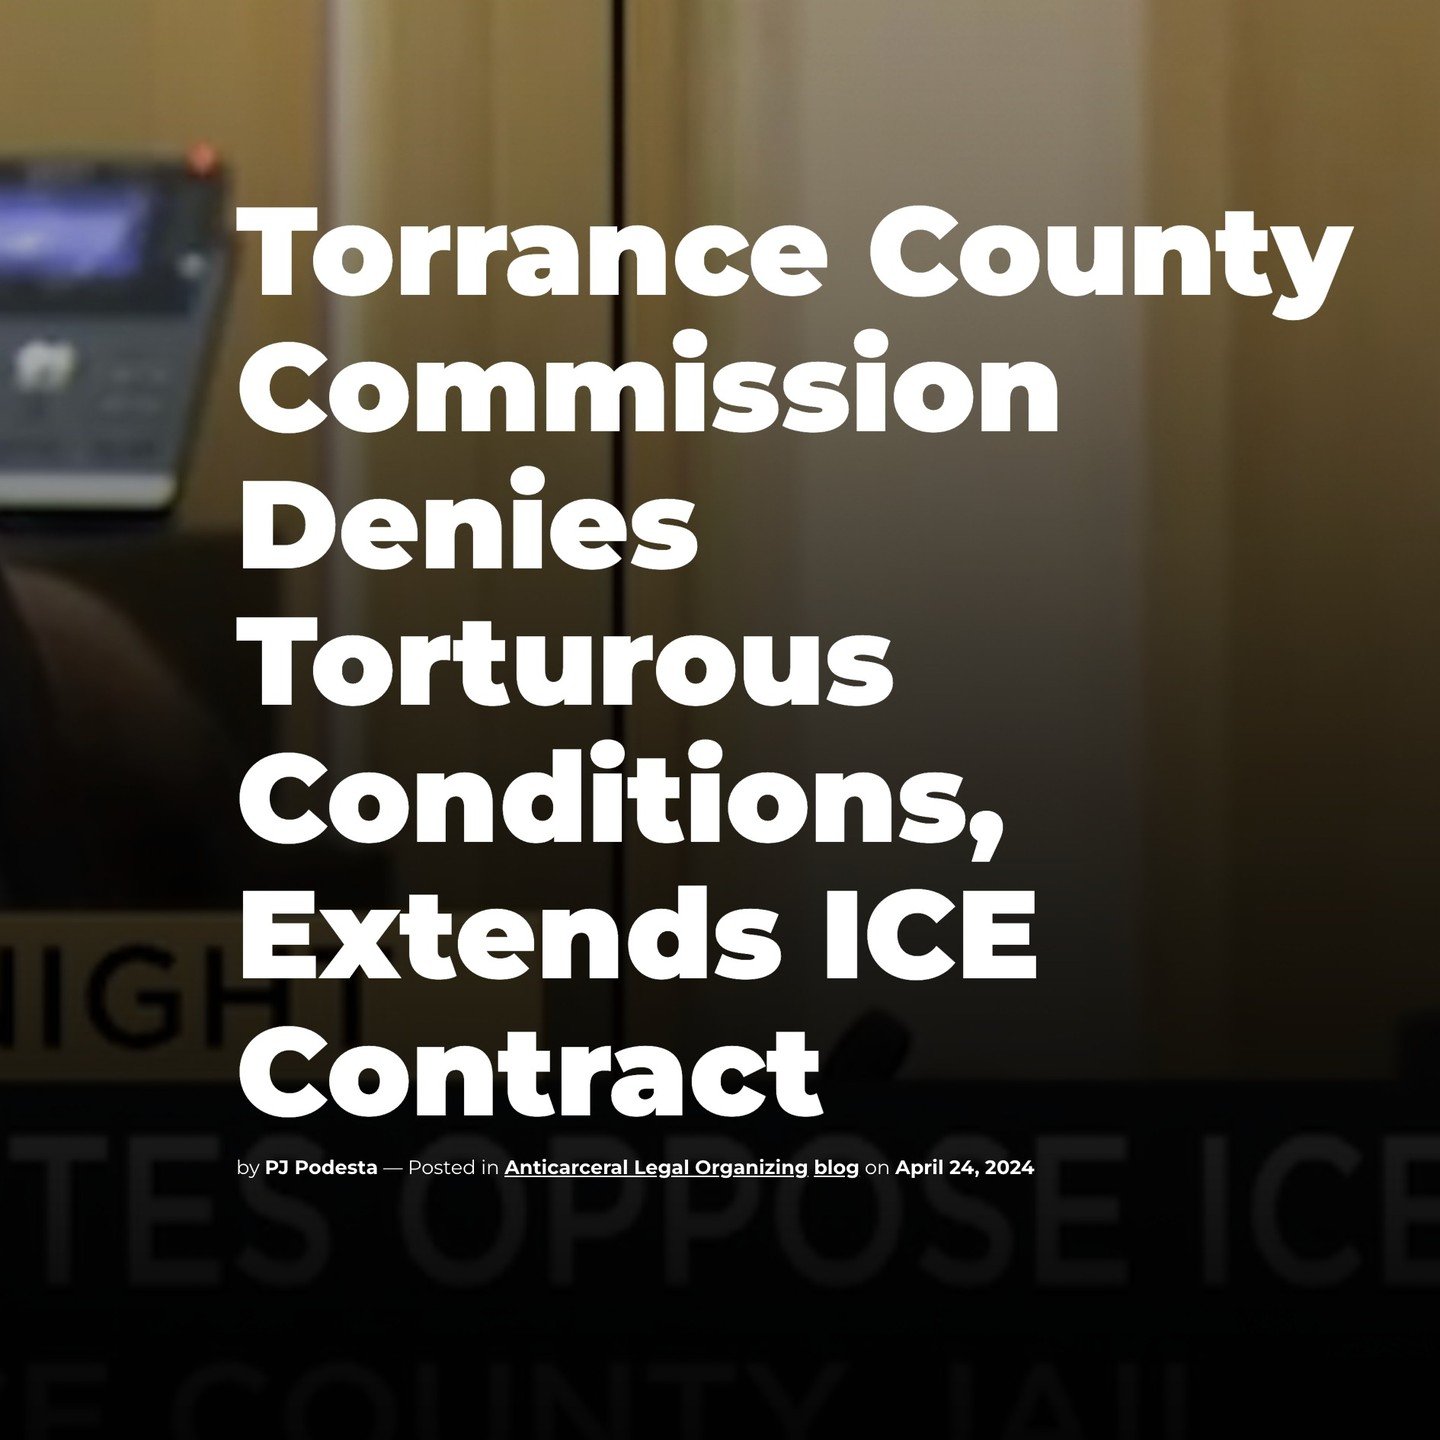 This past Wednesday, the Torrance County Commission unanimously voted to extend the ICE detention contract at the Torrance County Detention Facility for an additional four months. The contract was set to expire on May 14. 
During the meeting, the Dig